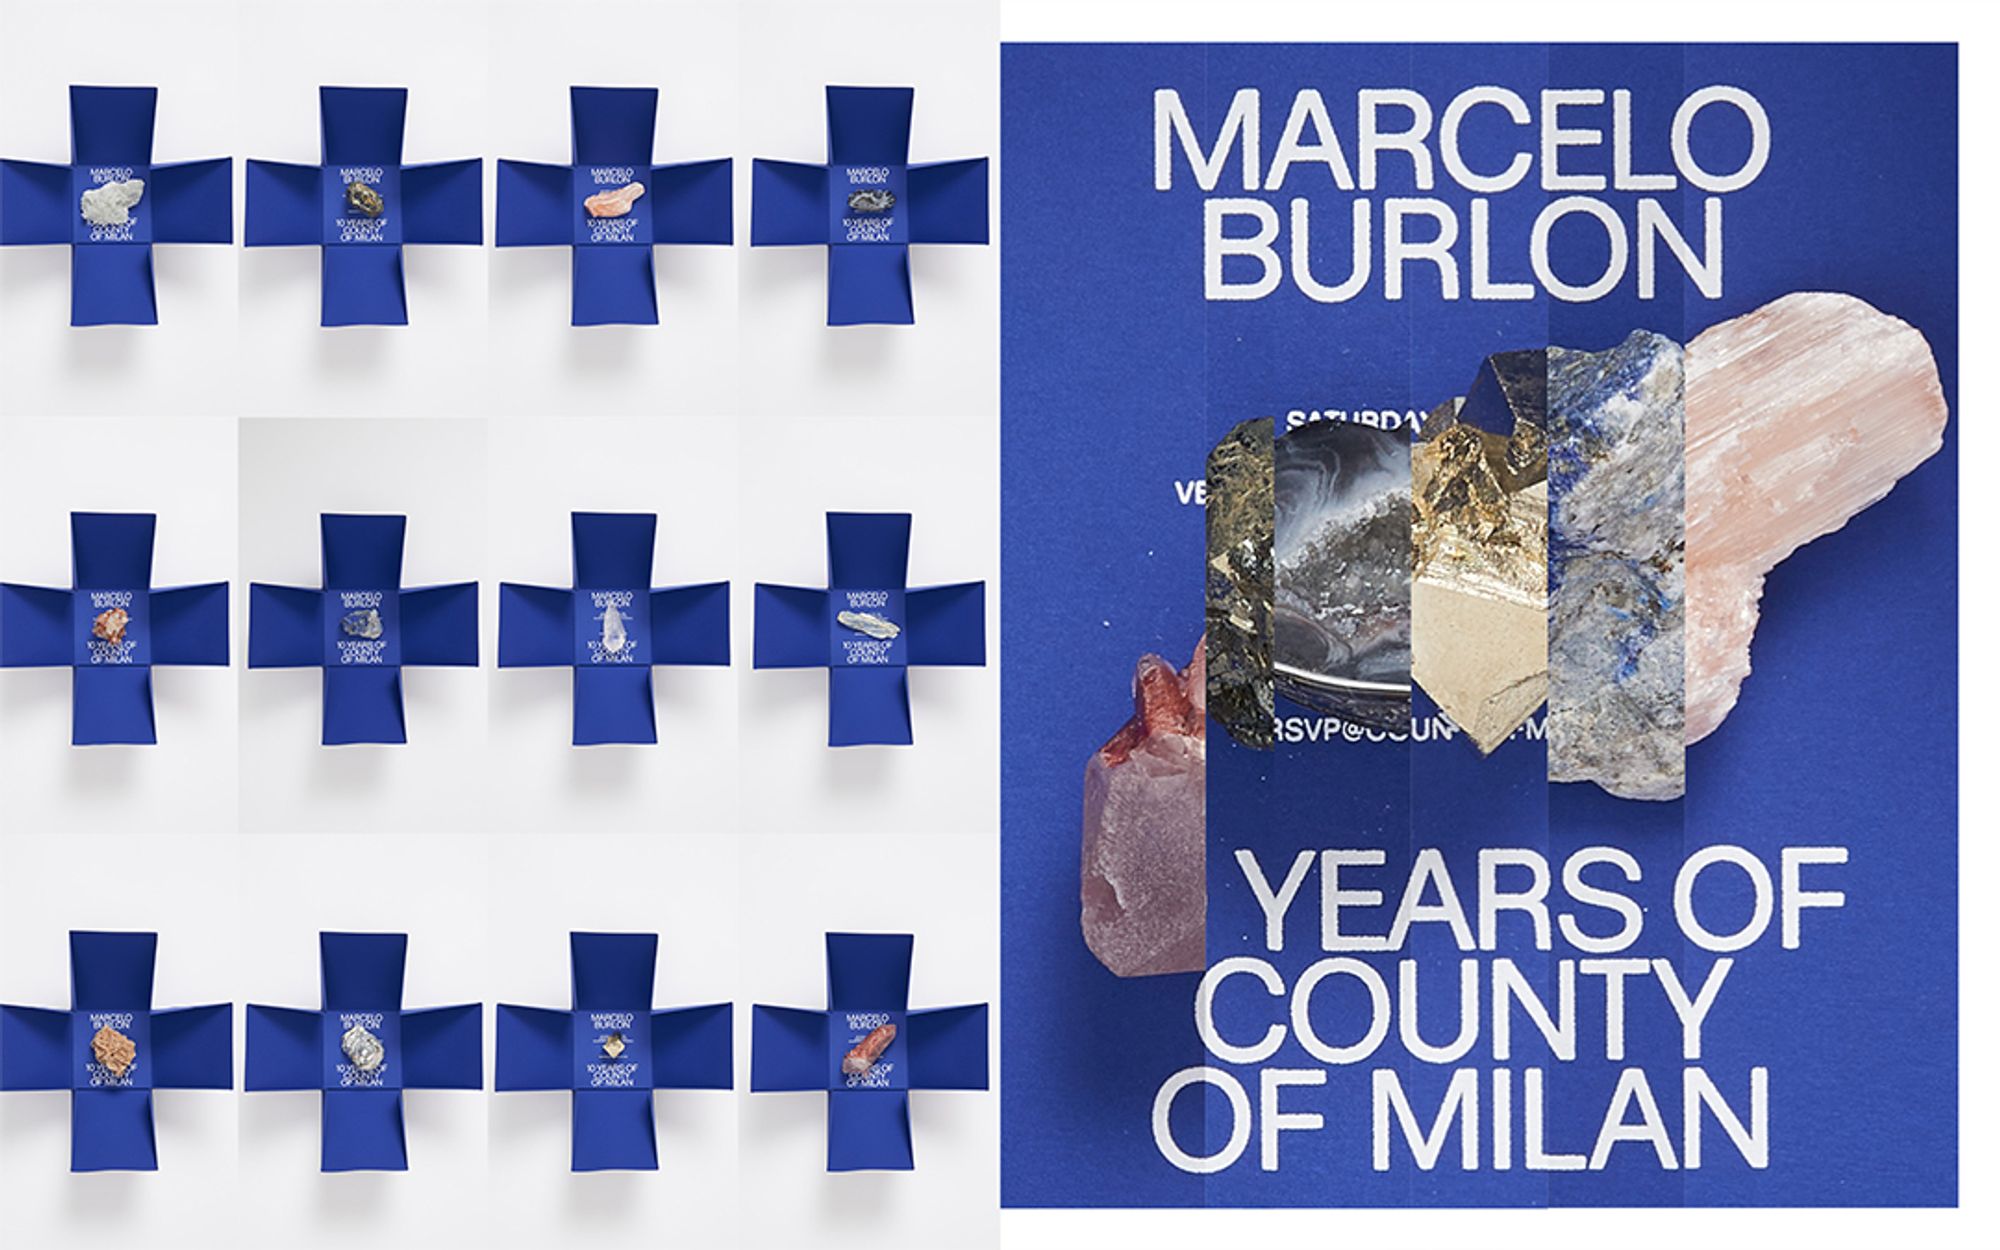 CREATIVE DIRECTION – EDITORIAL DIRECTION 10 YEARS OF COUNTY OF MILAN BOOK